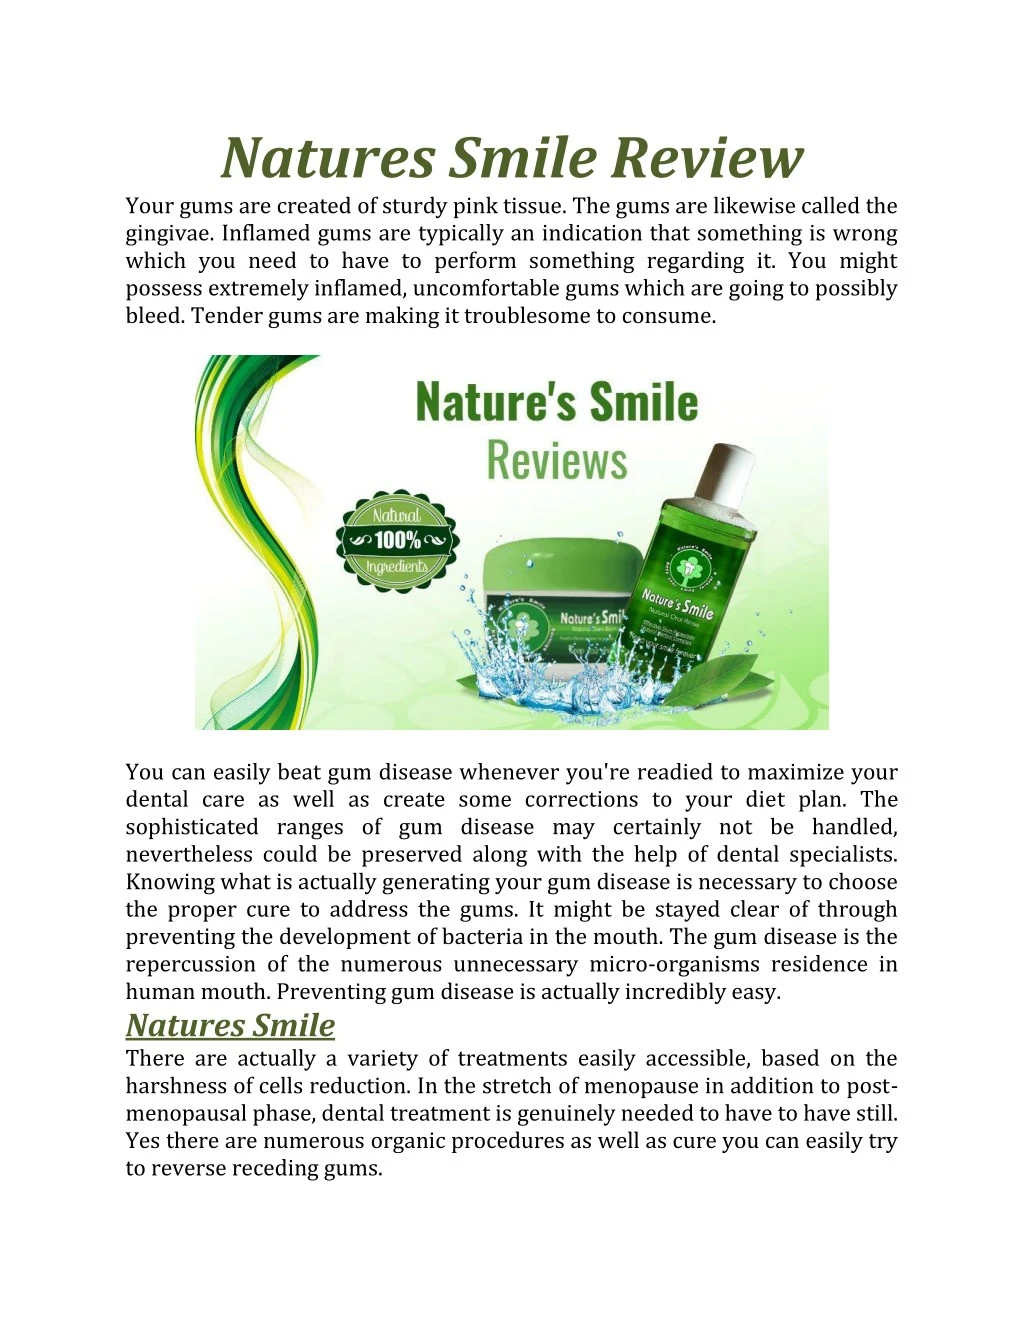 natures smile review your gums are created